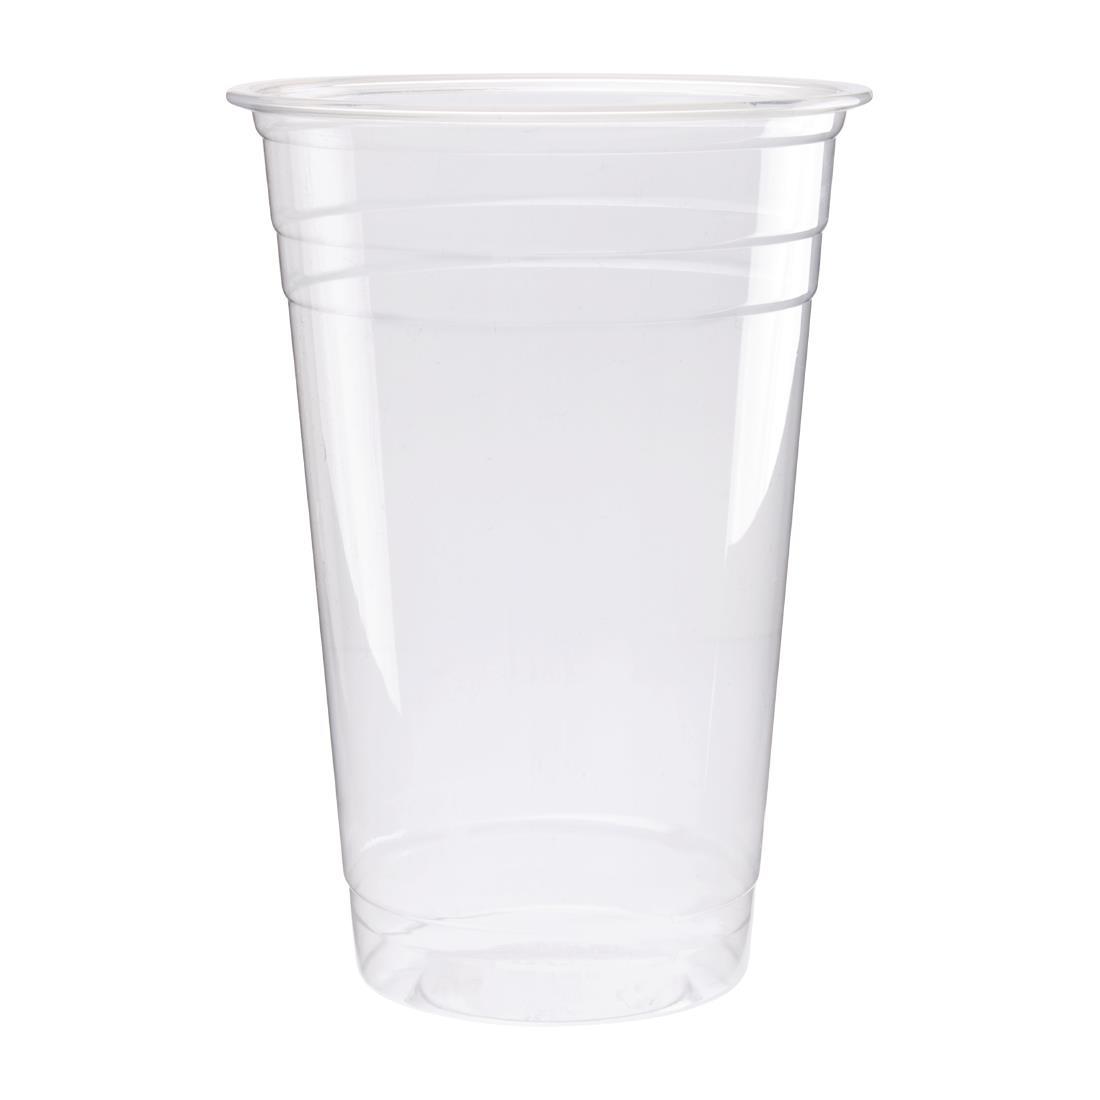 Fiesta Compostable PLA Cold Cups 568ml / 20oz (Pack of 1000) - FA344  - 1